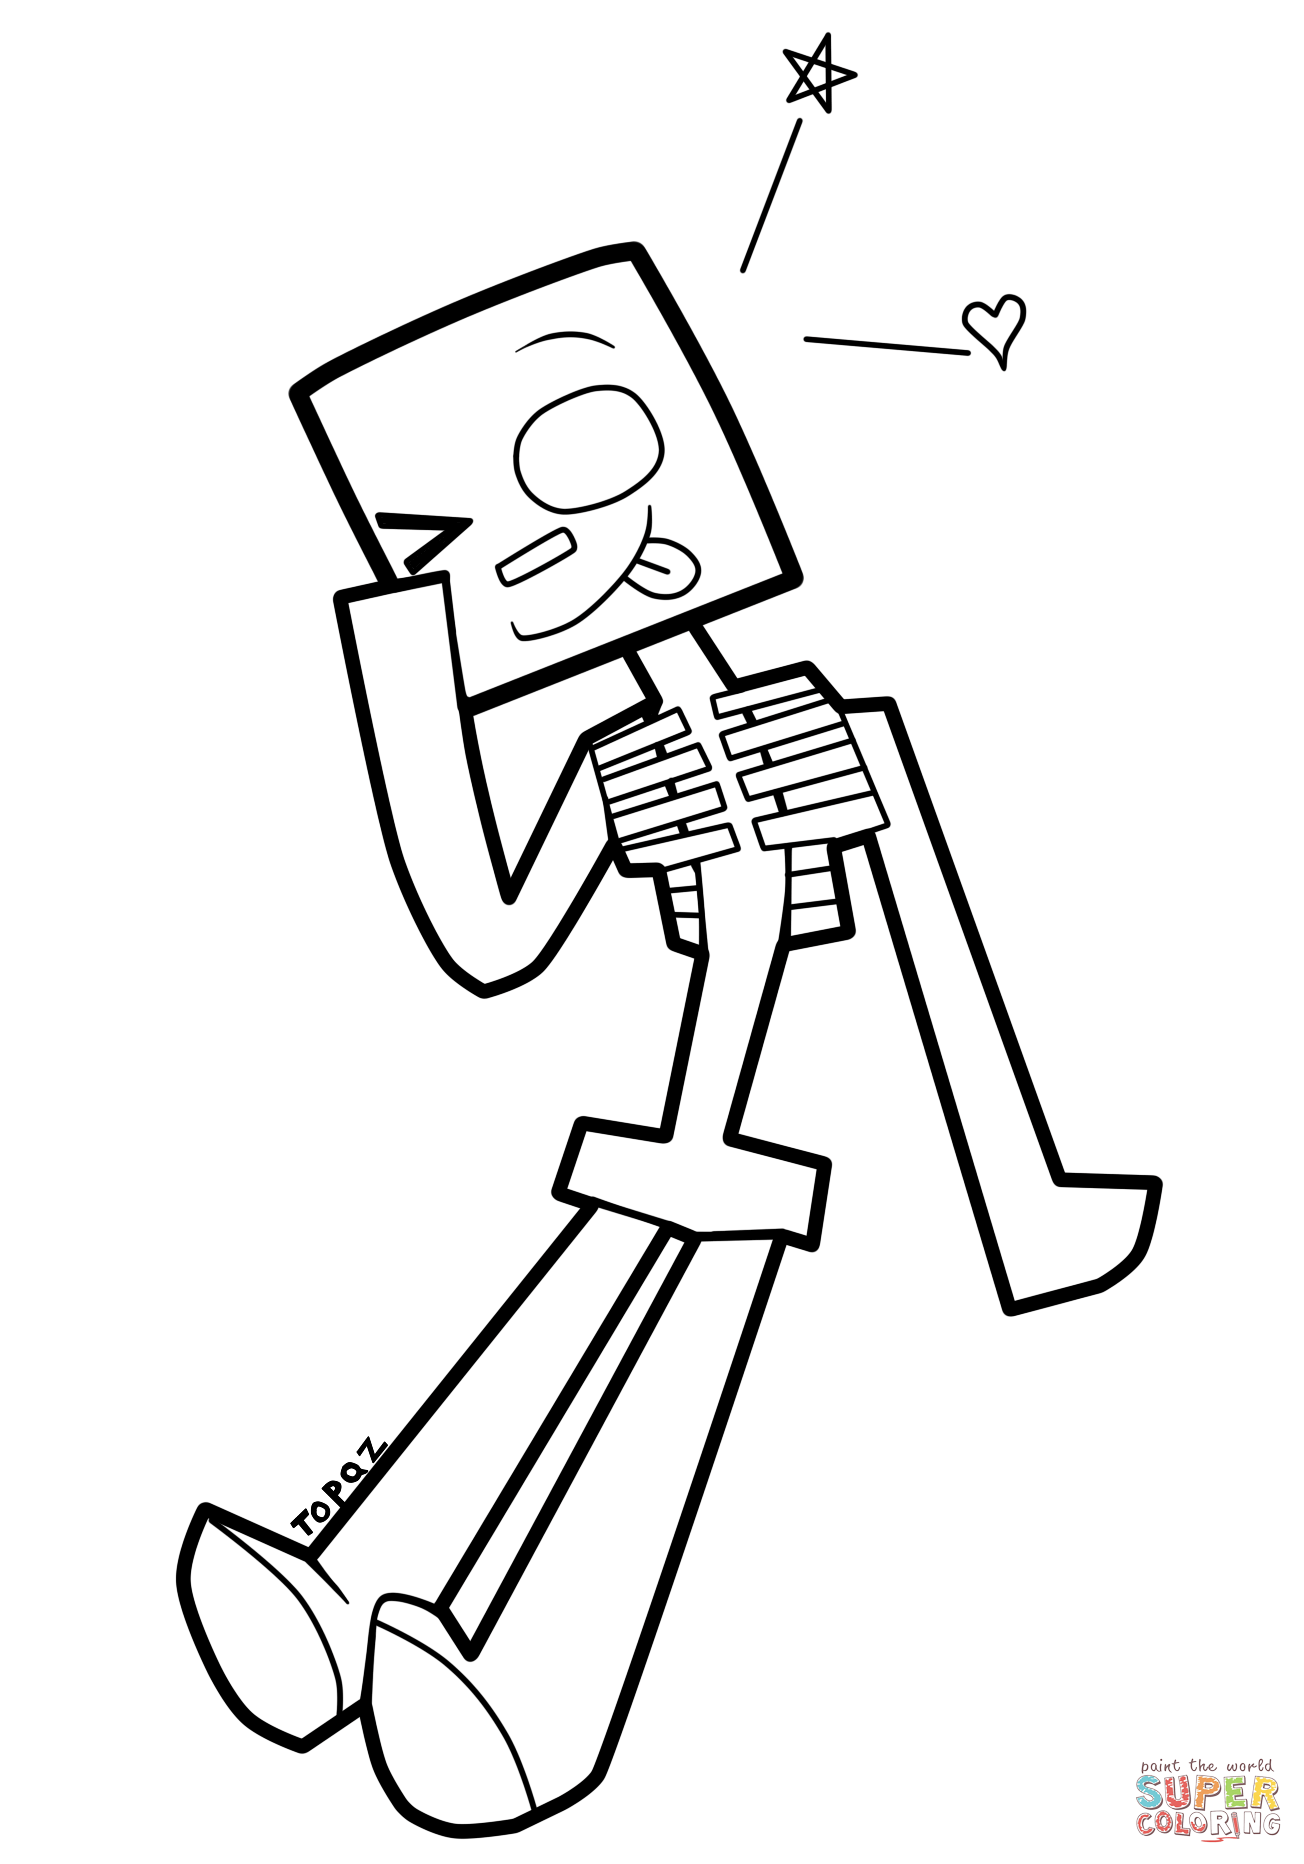 Minecraft Cartoon Skeleton from Minecraft Coloring Pages